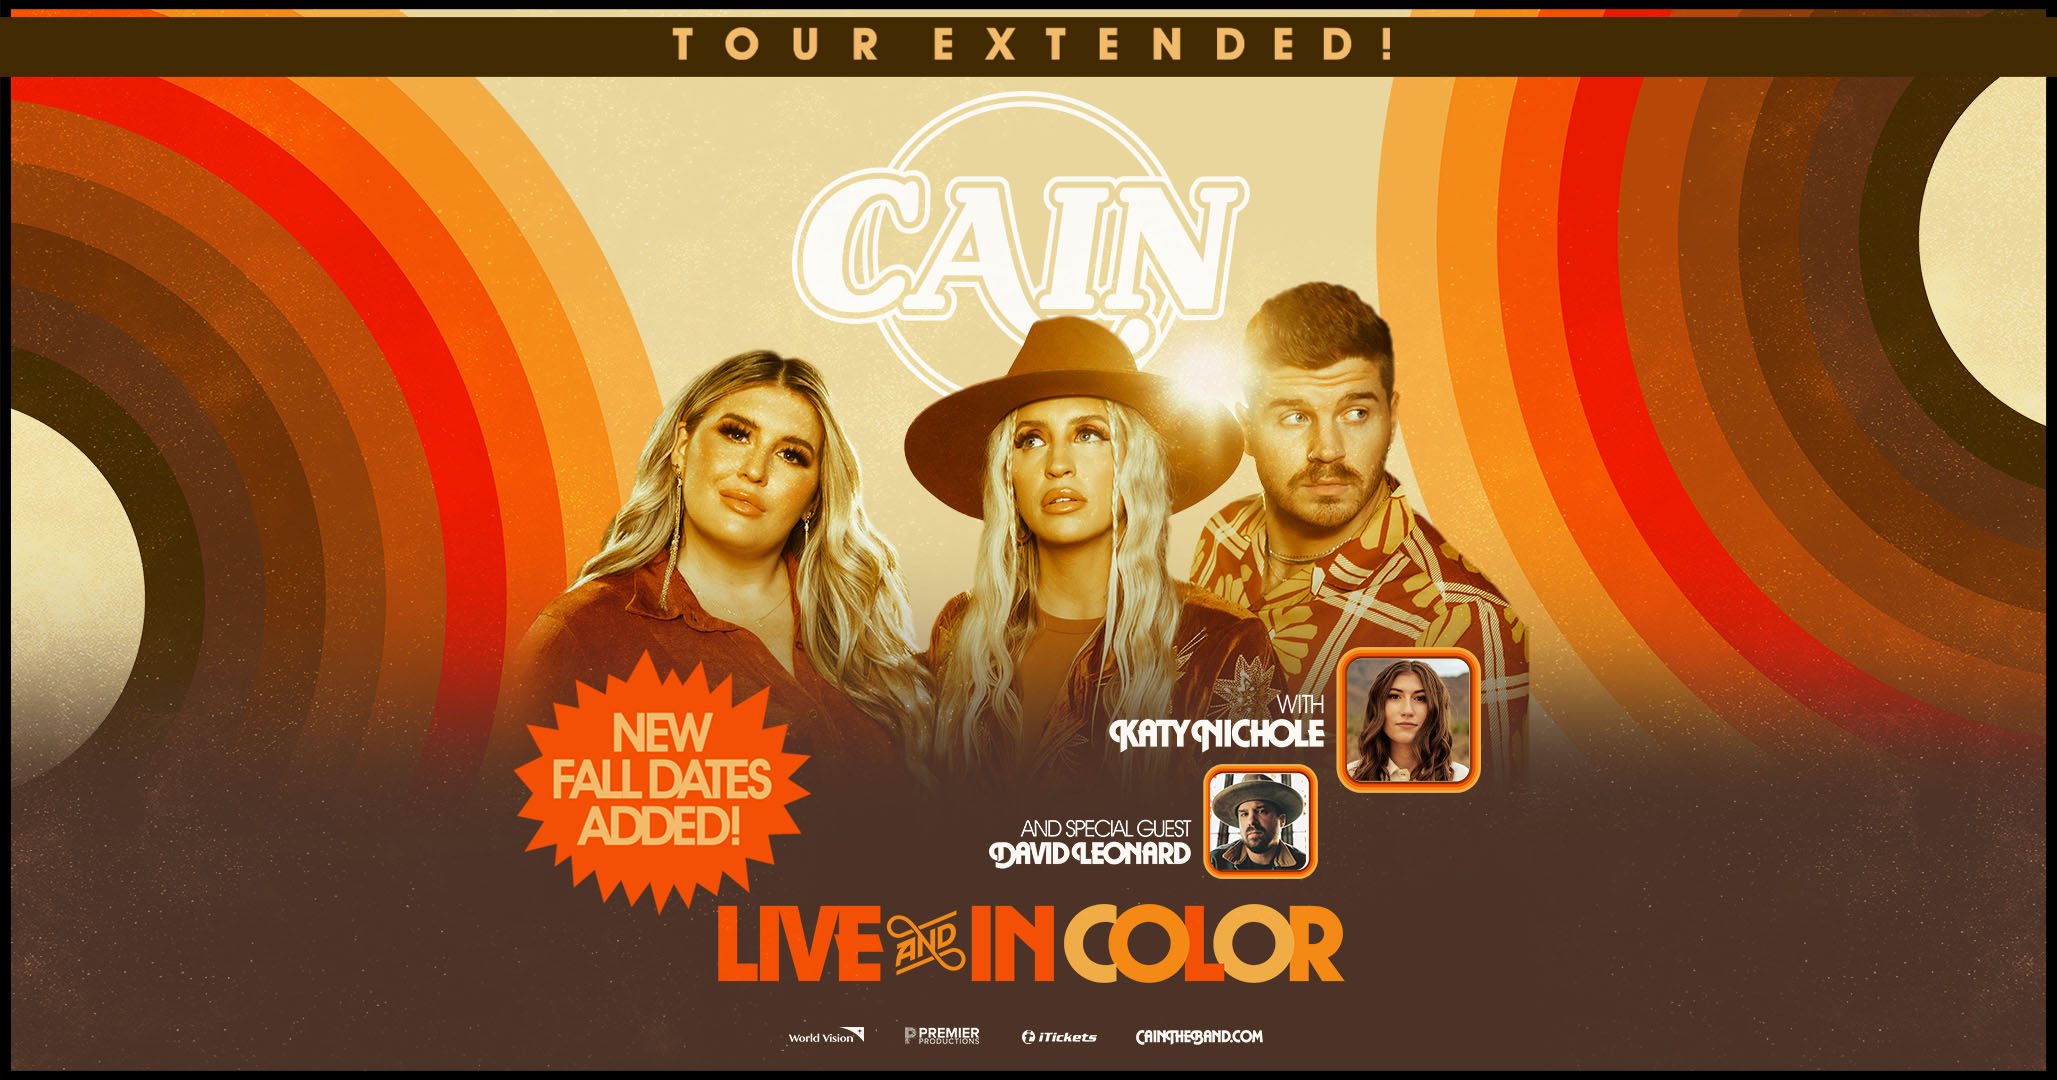 Live & In Color Tour